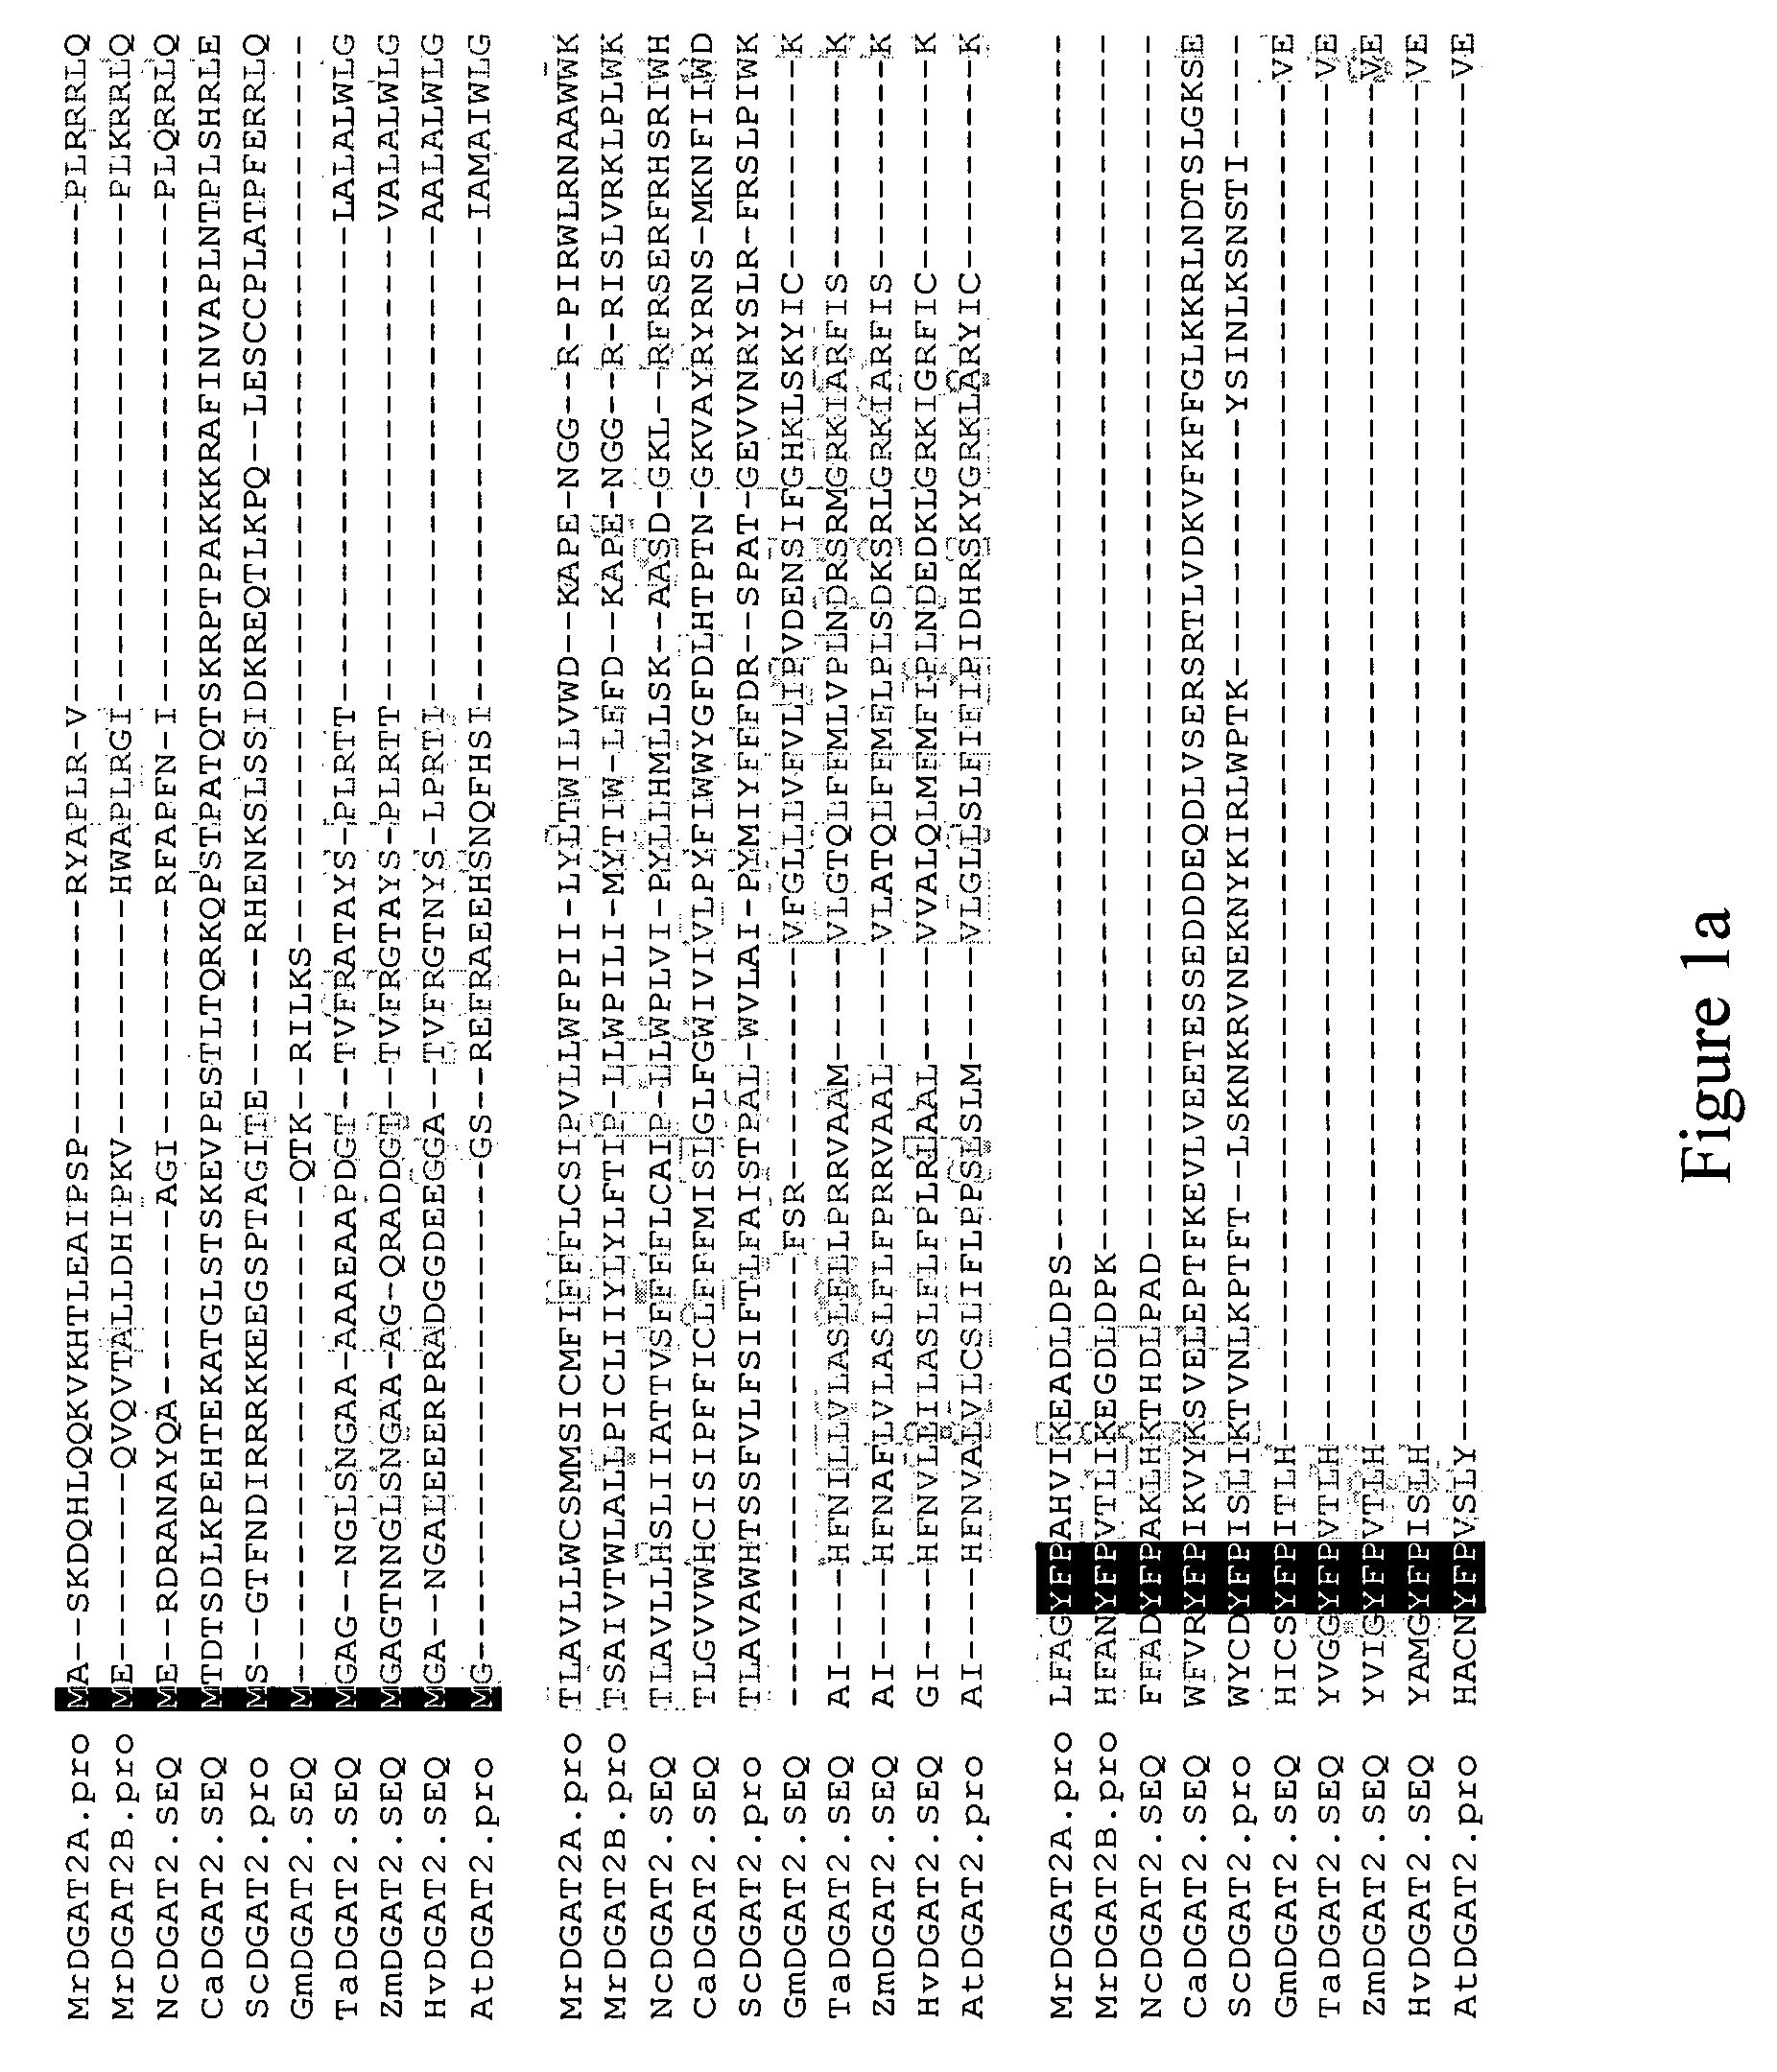 Diacylglycerol acyltransferase nucleic acid sequences and associated products